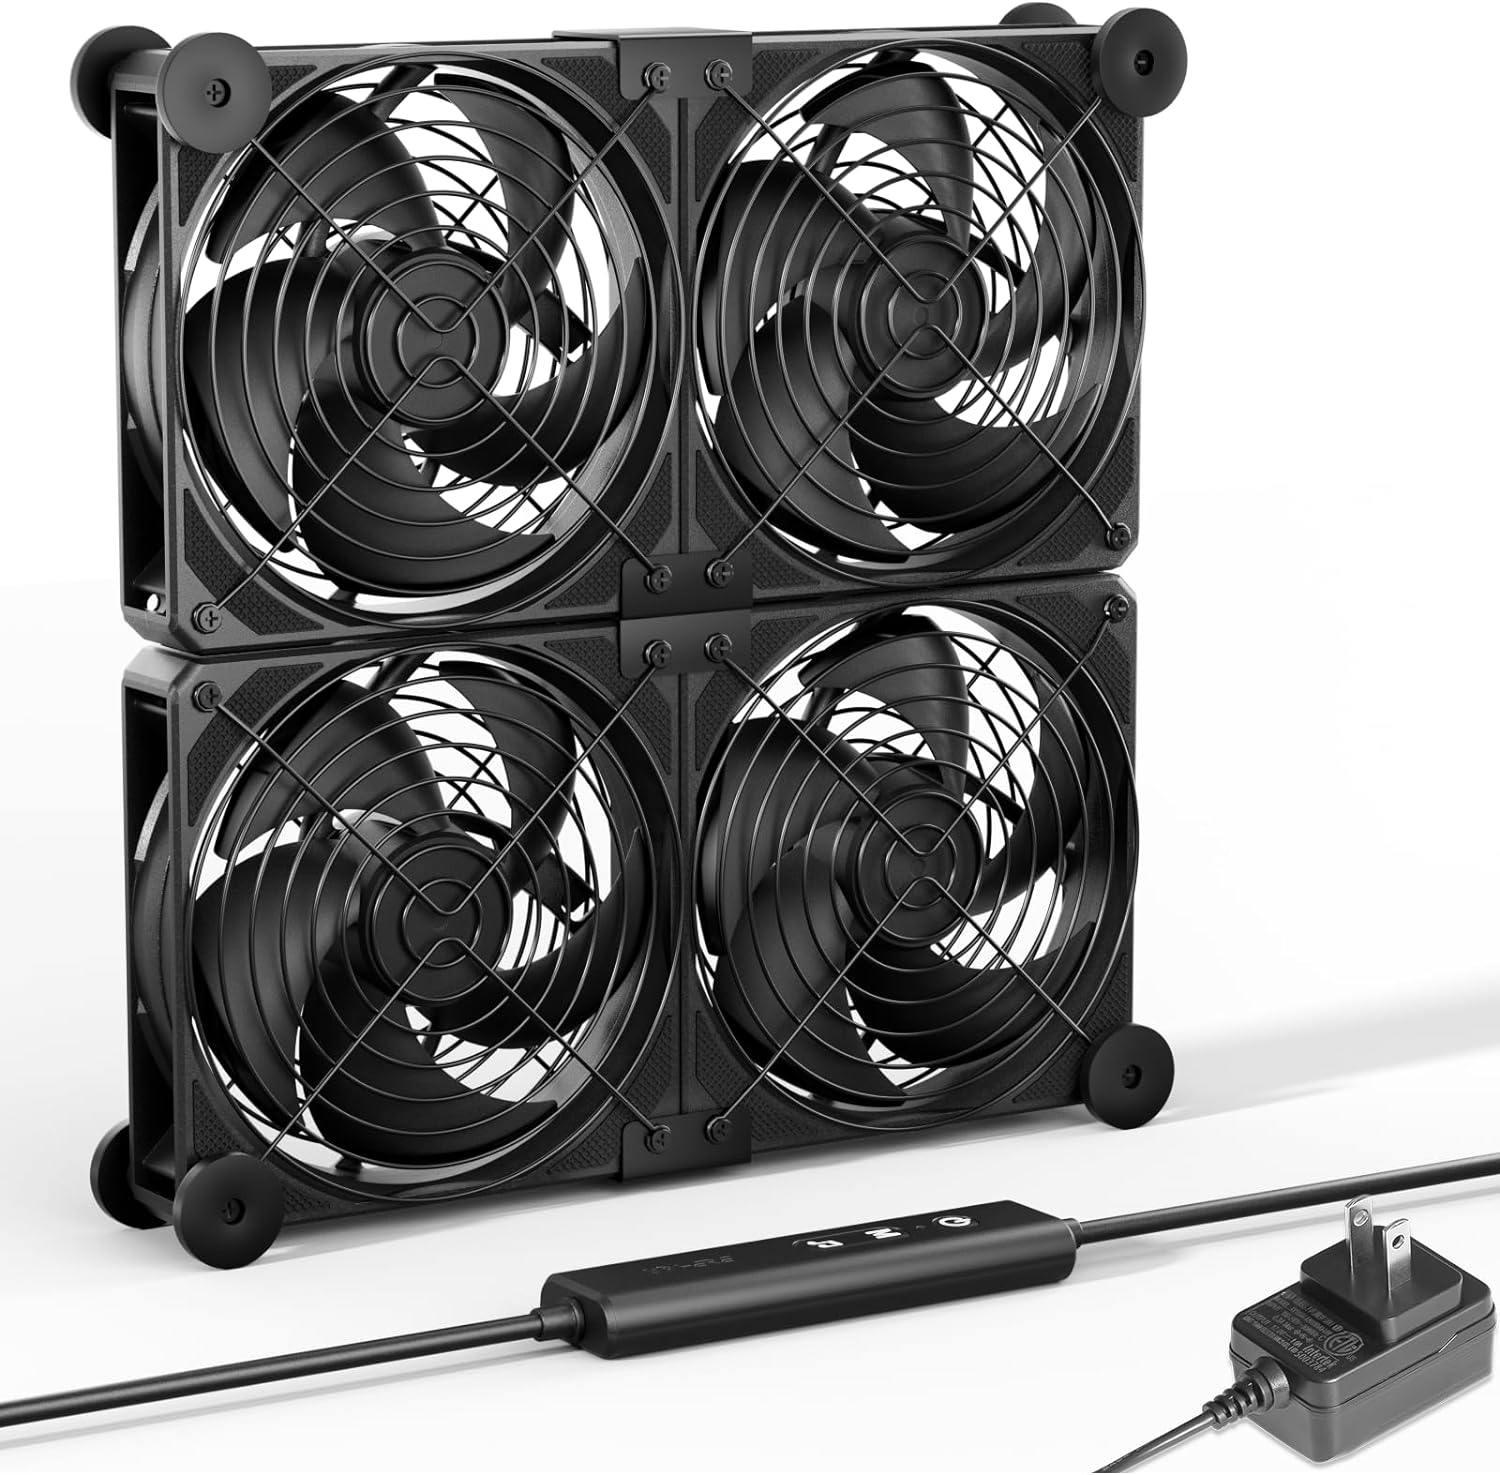 upHere Big Airflow 4 x 120mm Computer Fan with AC Plug Cabinet Fan 100V 240V AC Power Supply,DC 12V 5 Speed Controller, for Router Mining Machine Chassis Server Workstation Cooling